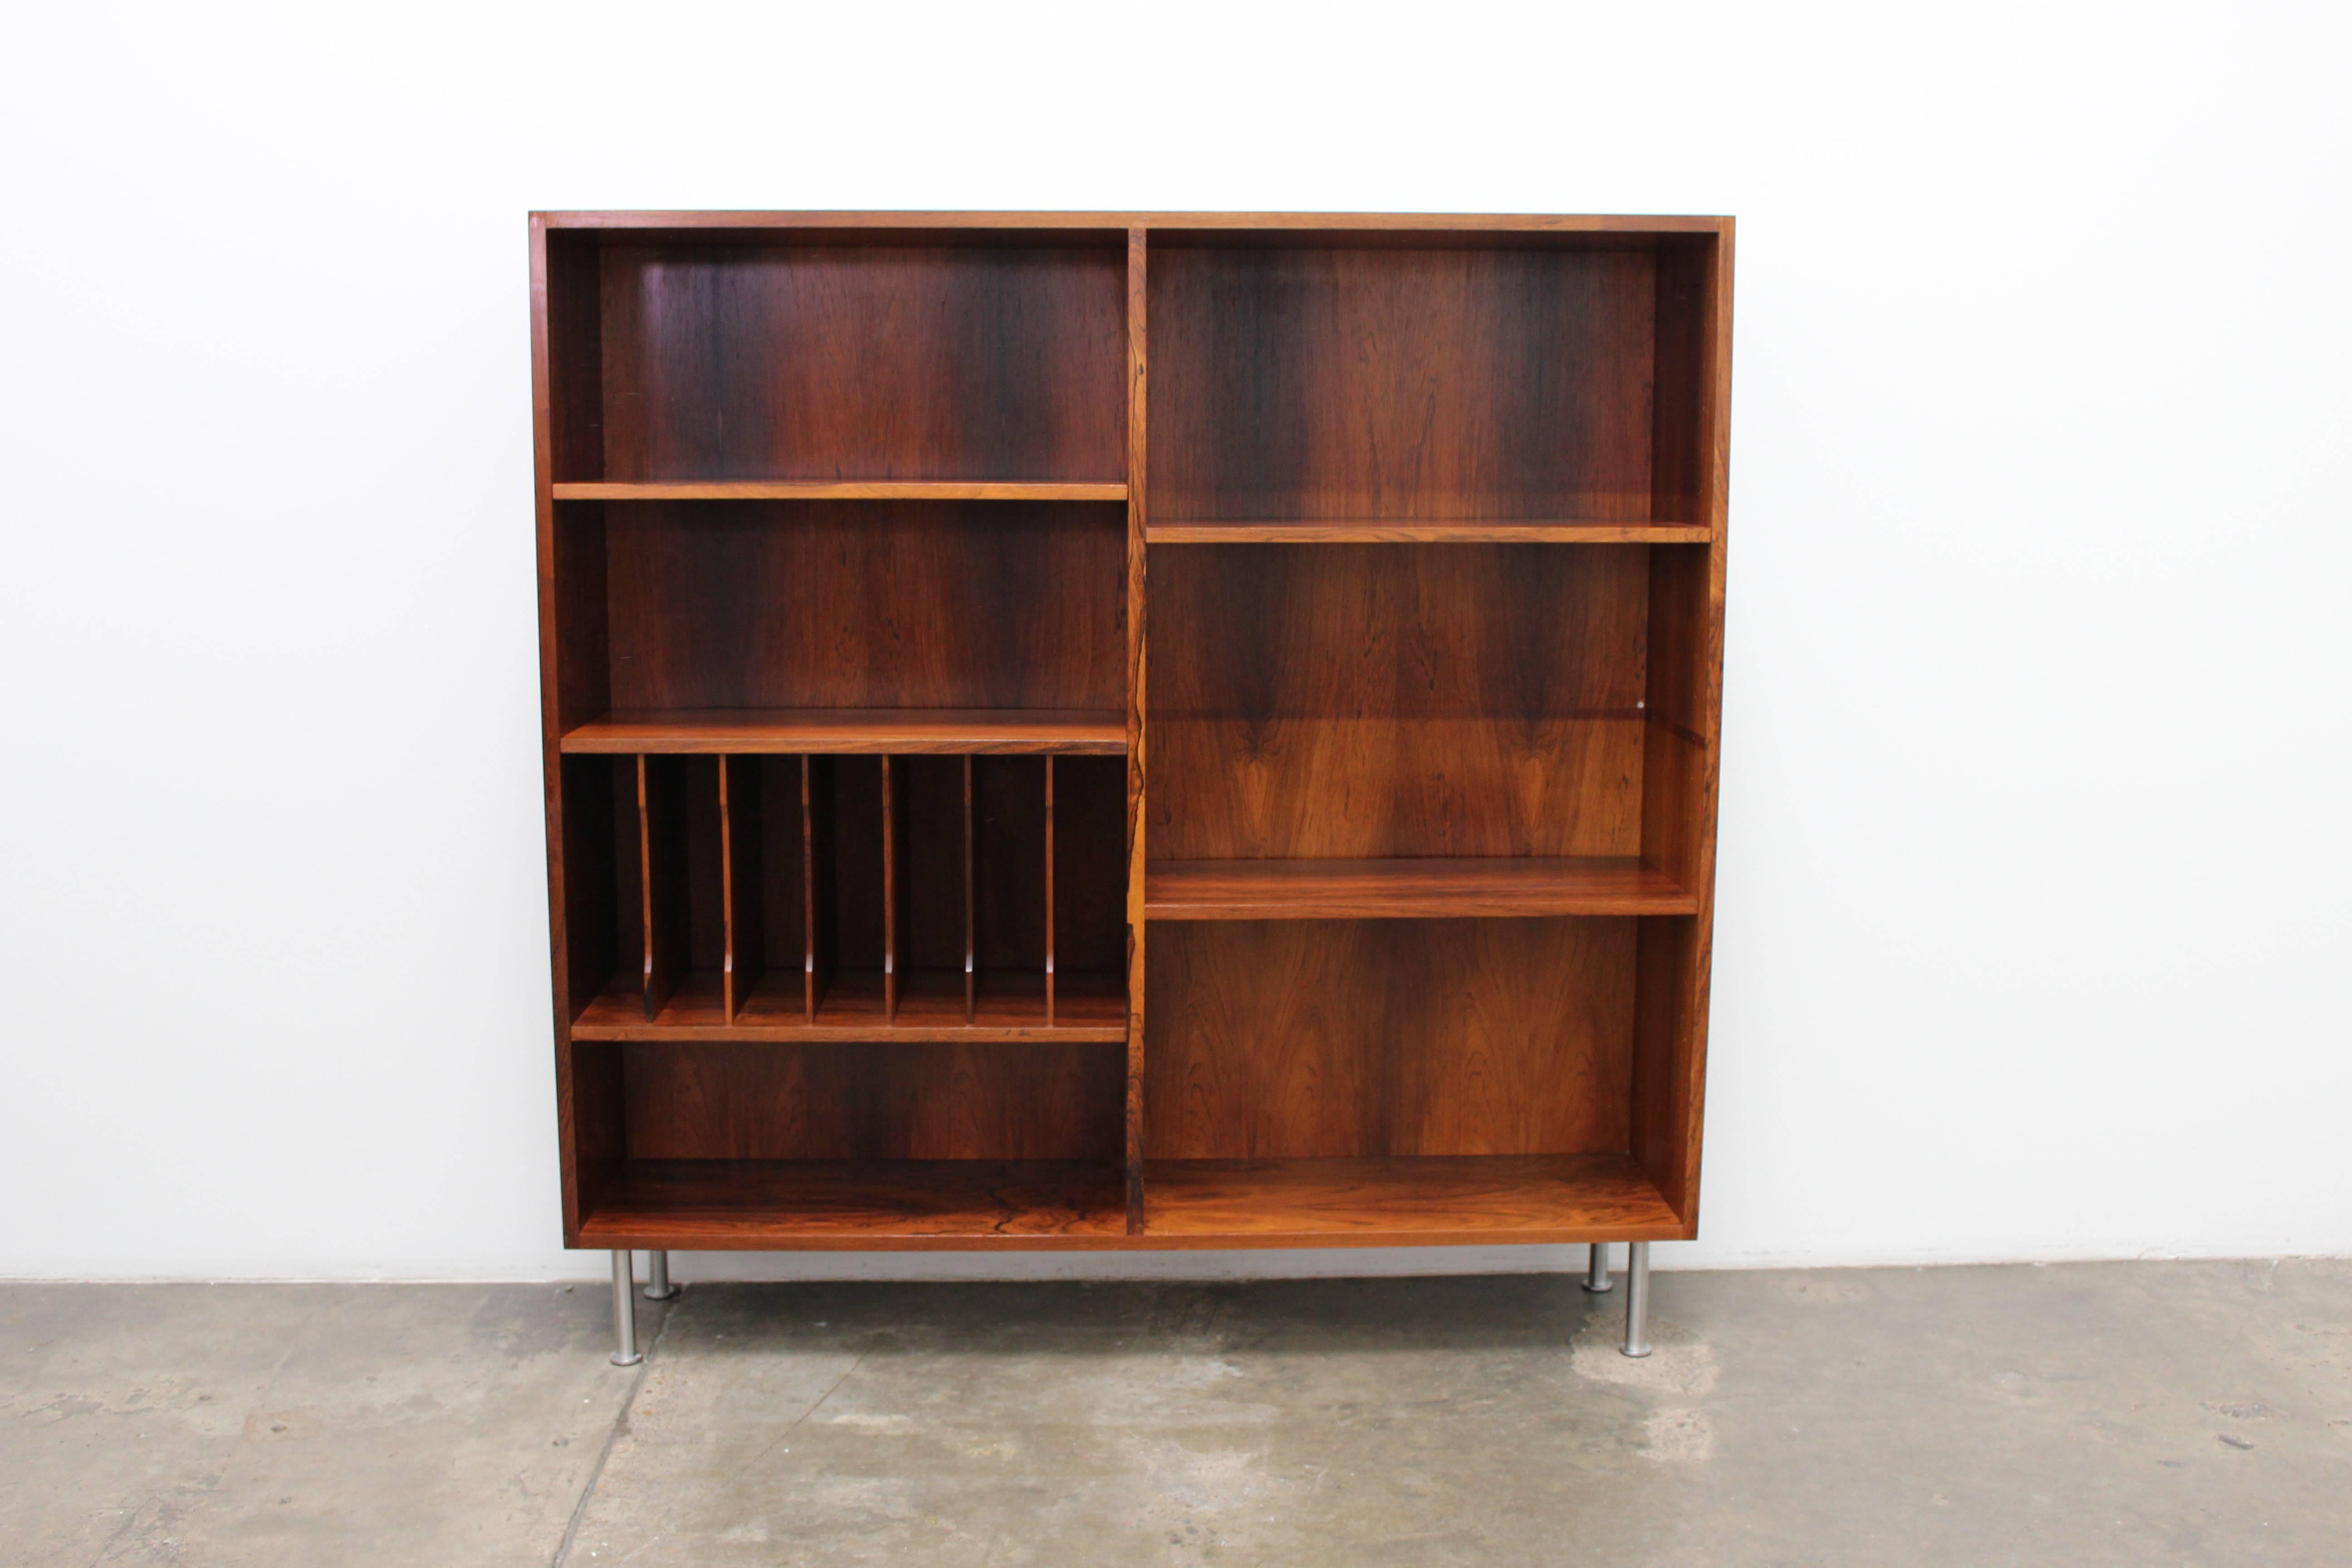 Rosewood Bookcase with Metal Legs, Danish Mid-Century Modern For Sale 2